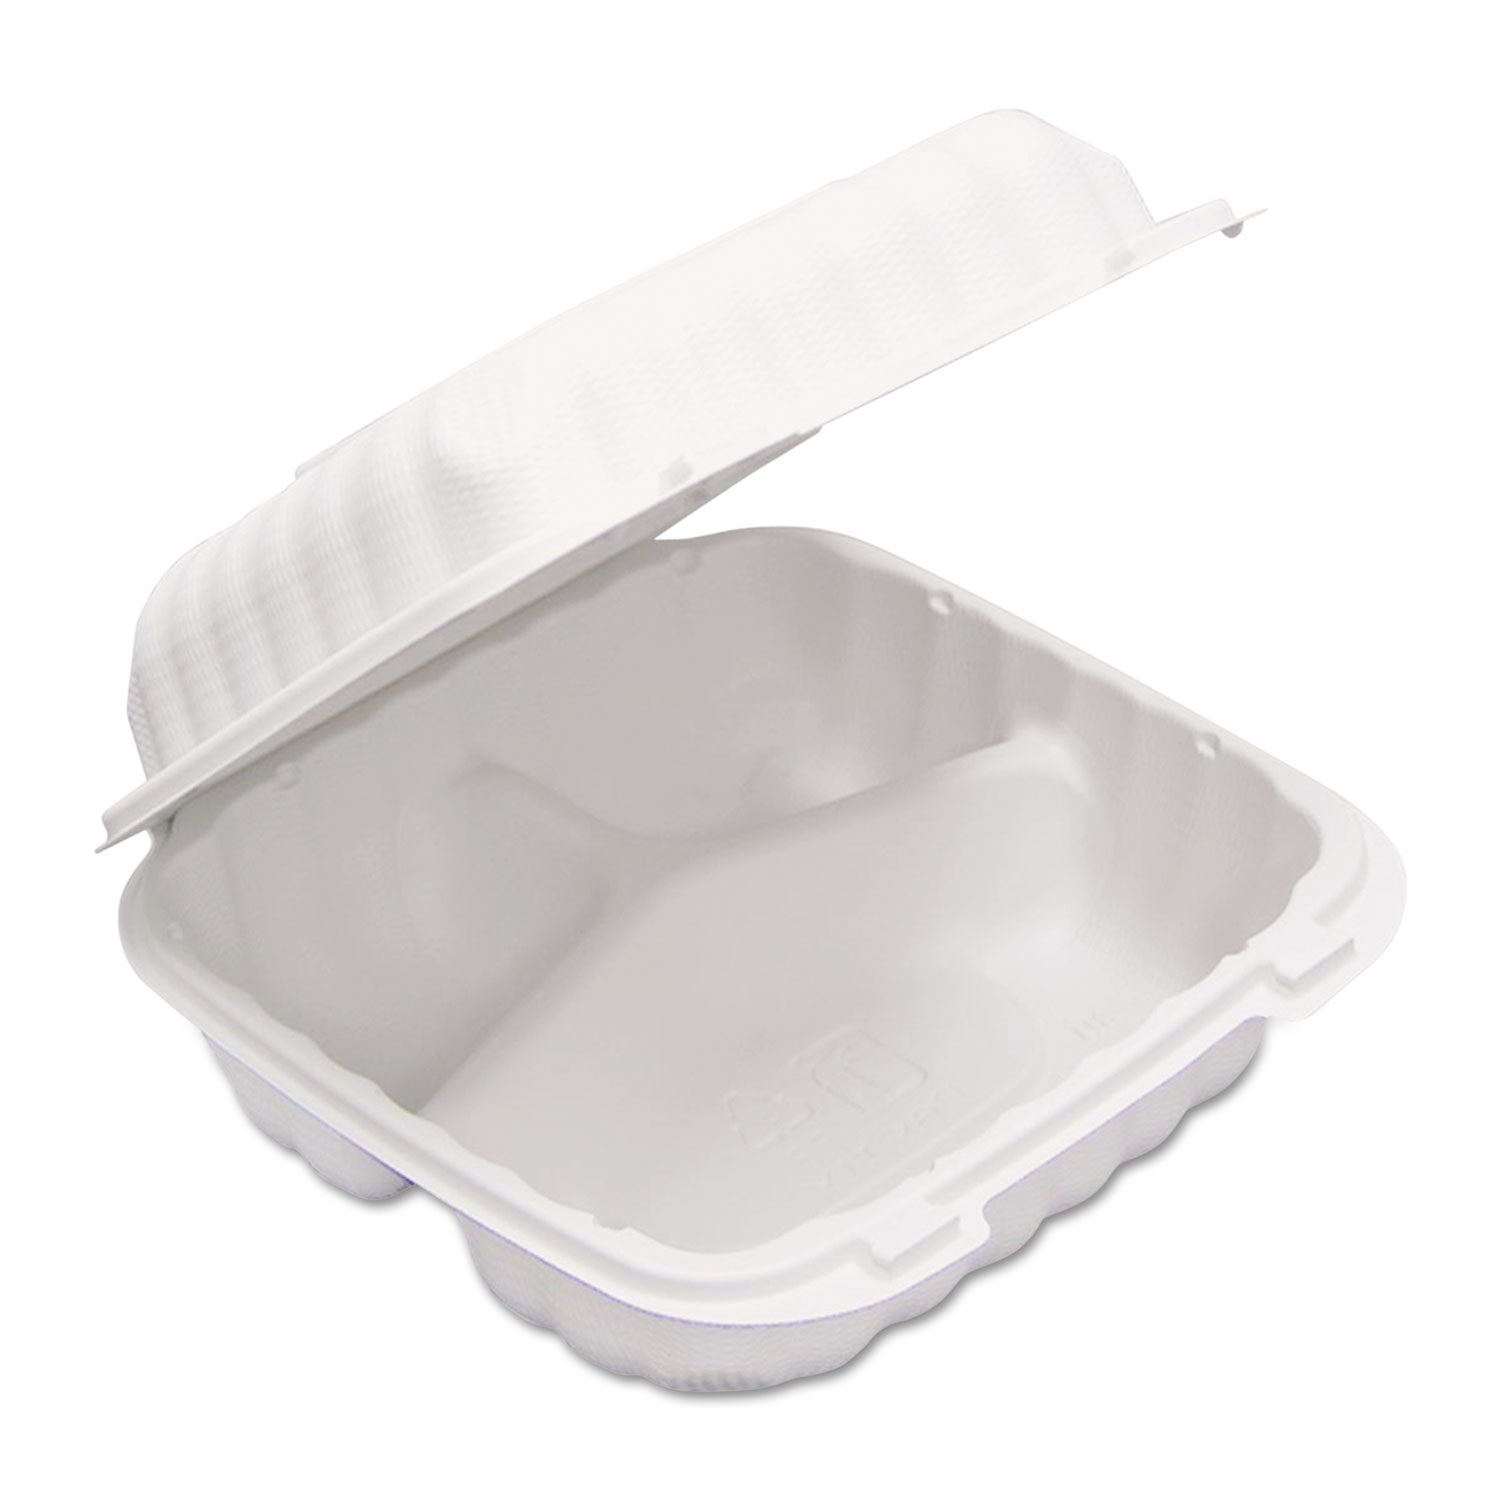 EarthChoice SmartLock Hinged Lid Containers, White, 22 oz, 200/Carton